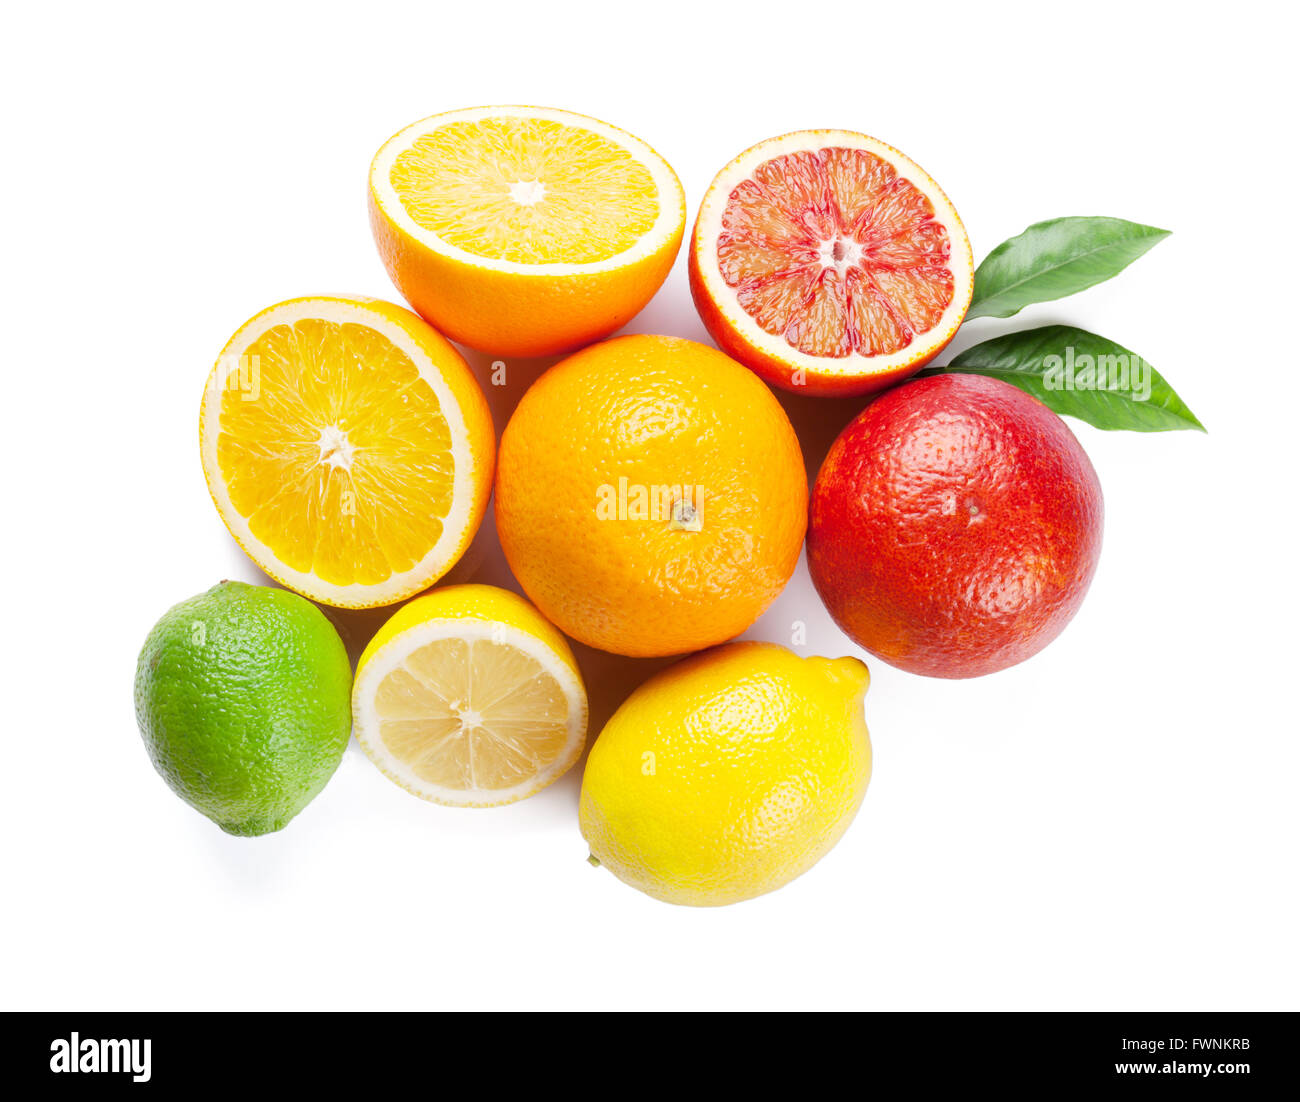 Fresh ripe citruses. Lemons, limes and oranges. Isolated on white background. Top view Stock Photo